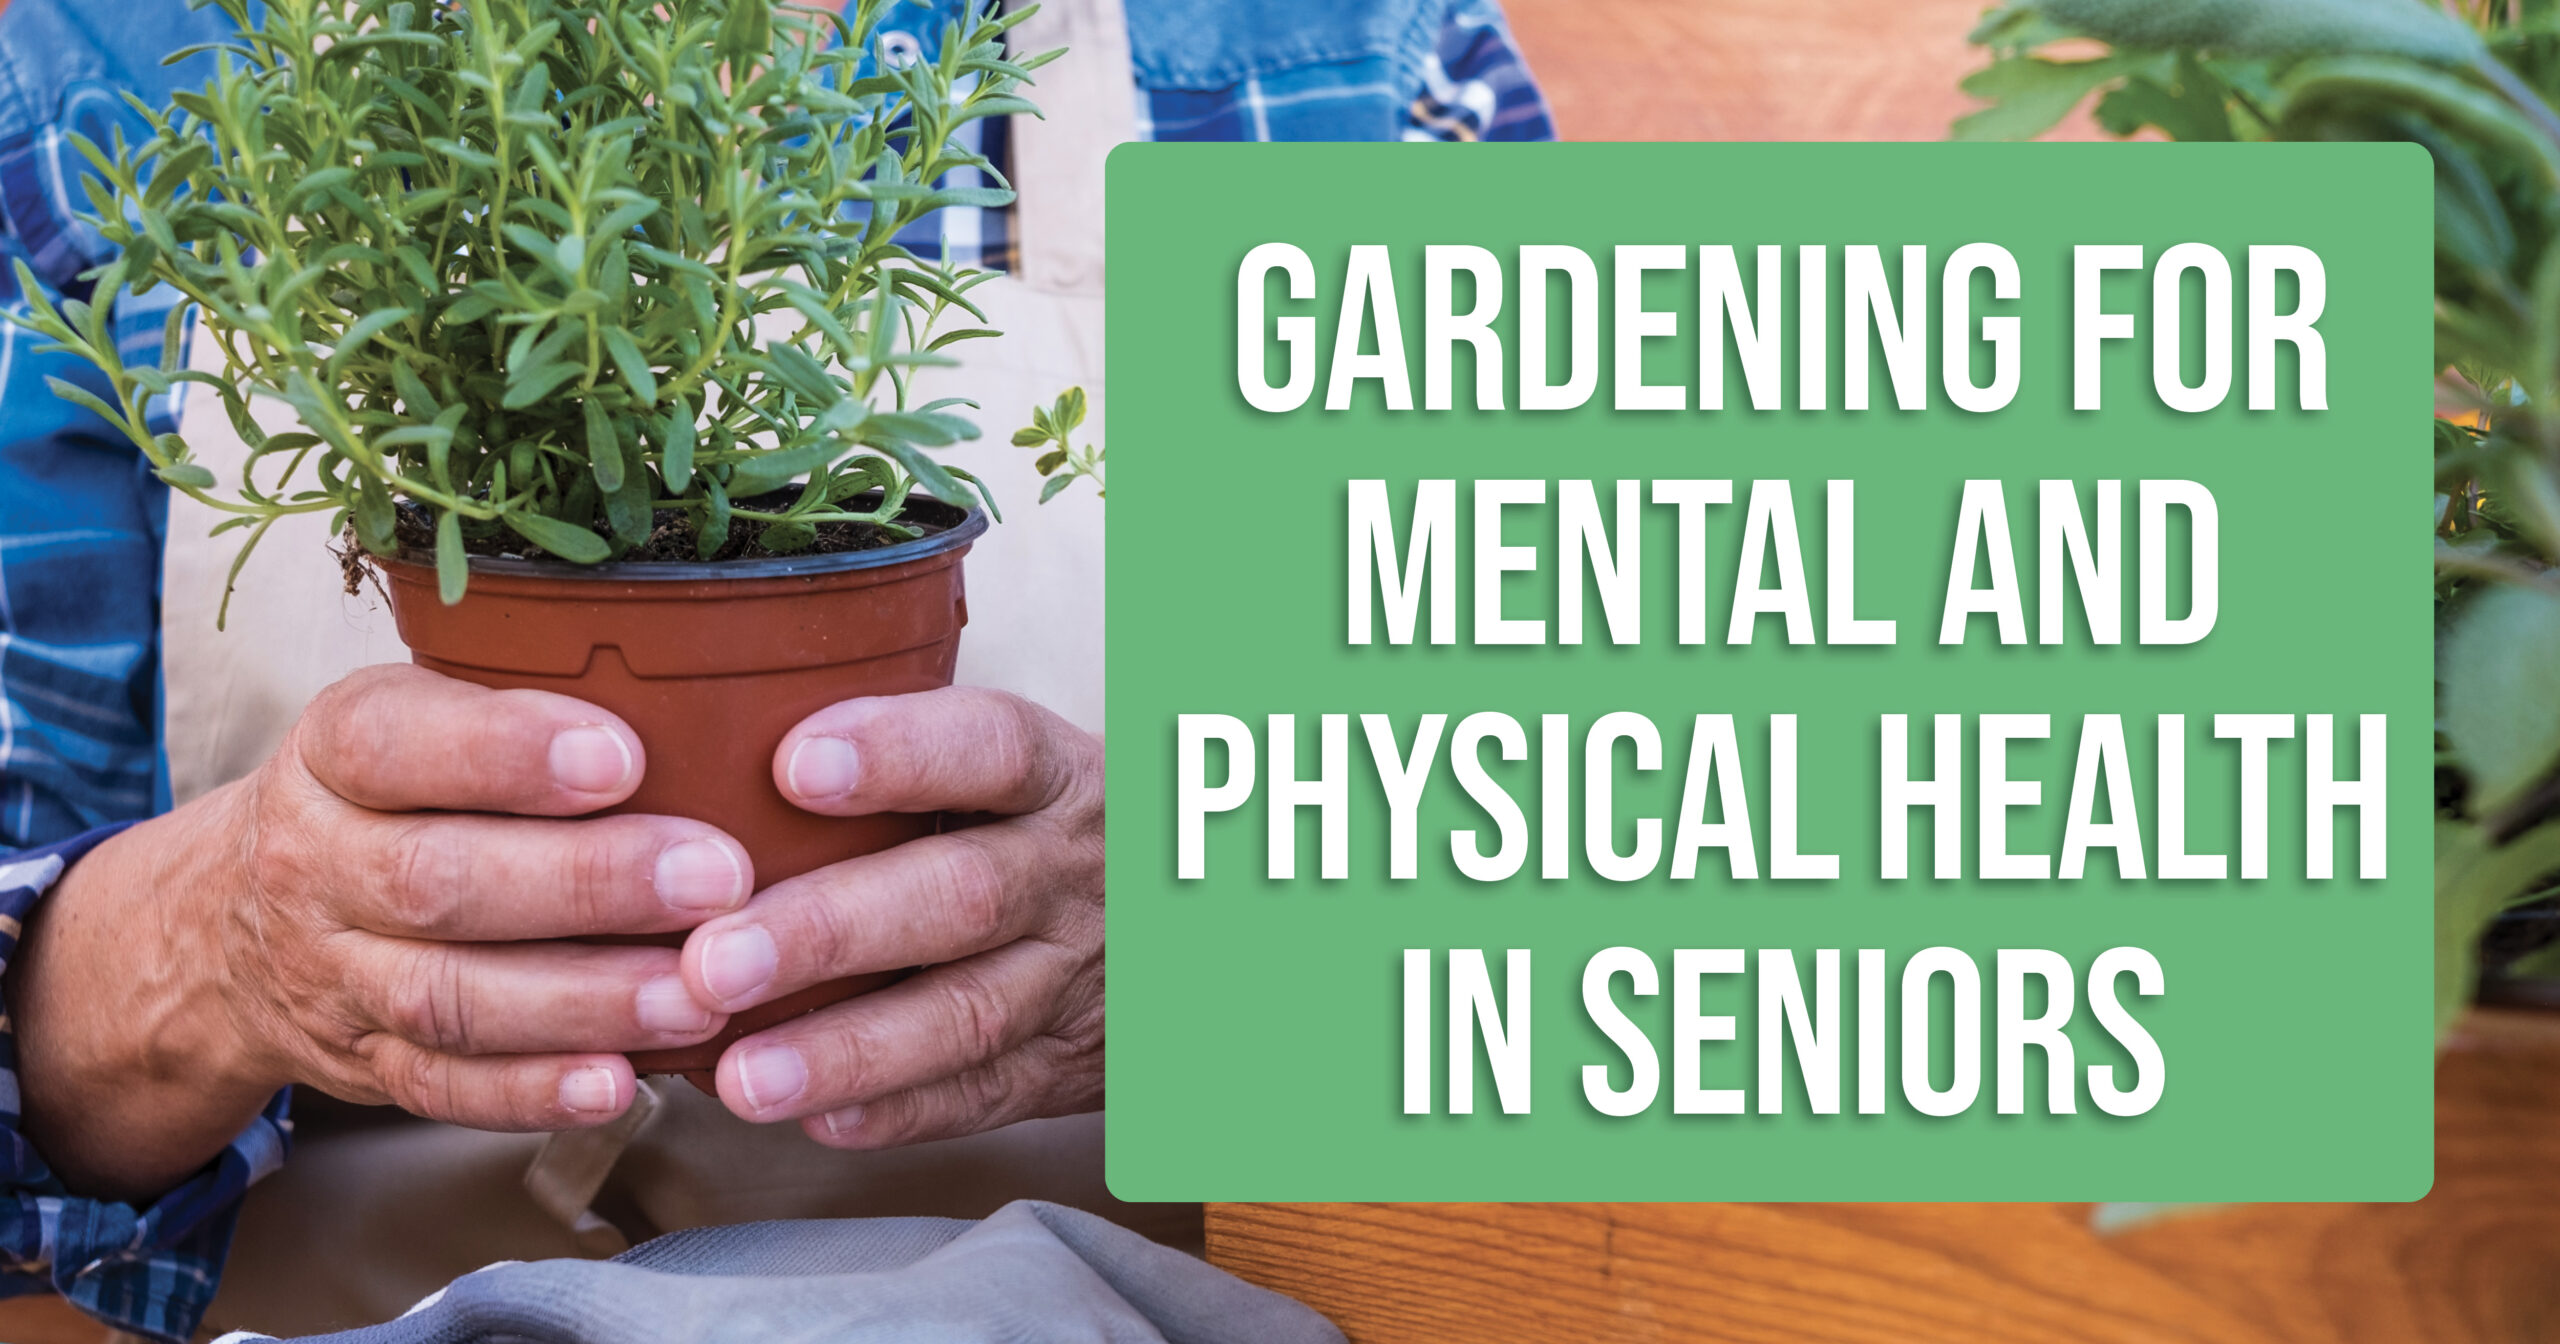 Starting Your Own Garden: The Mental and Physical Health Benefits for Seniors